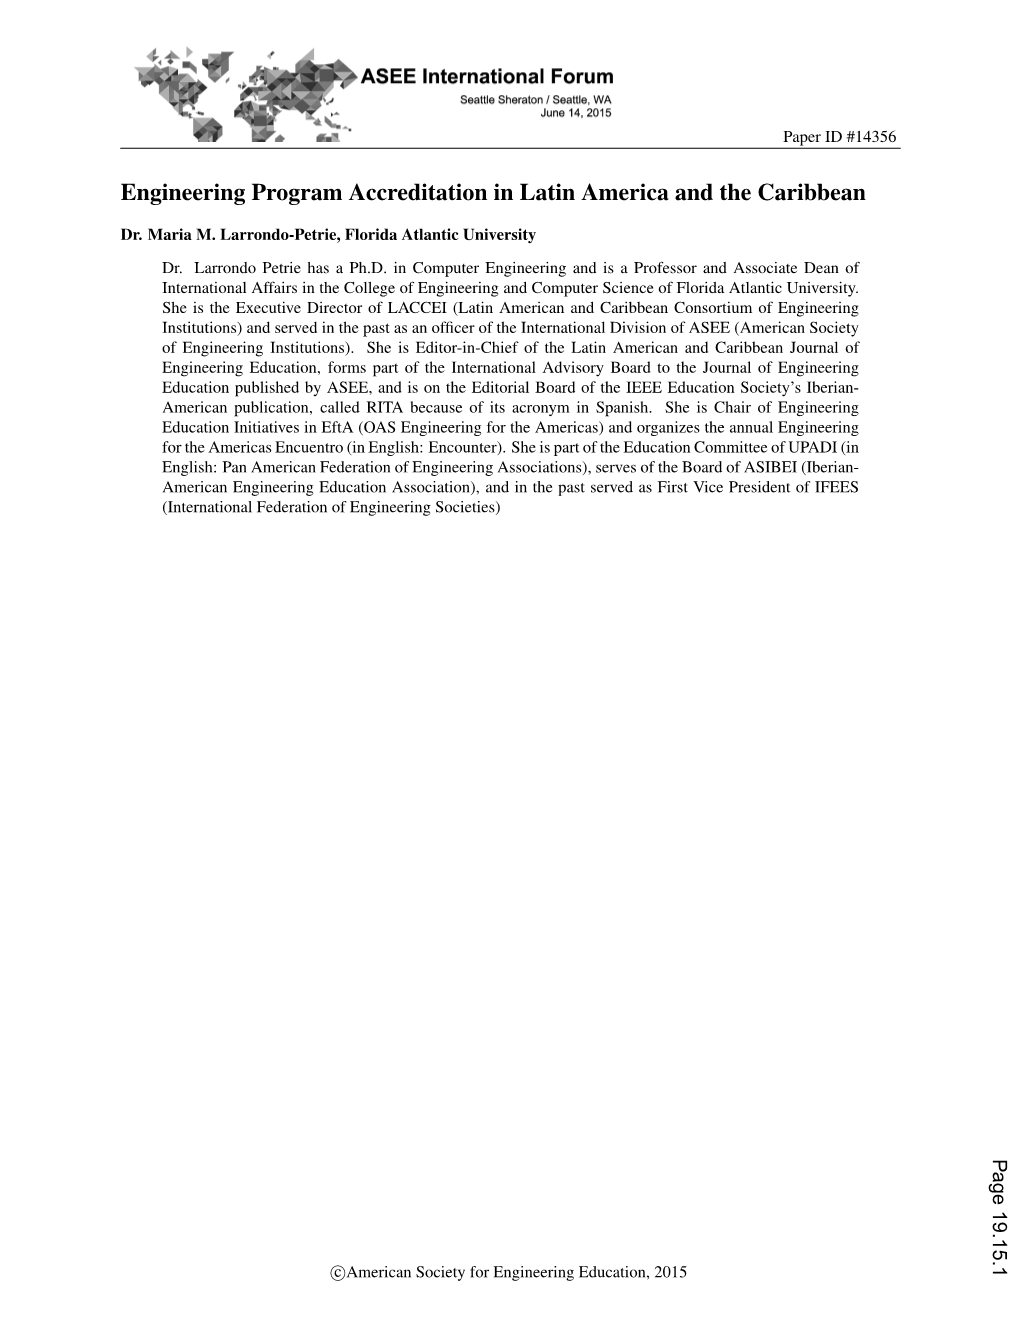 Engineering Program Accreditation in Latin America and the Caribbean